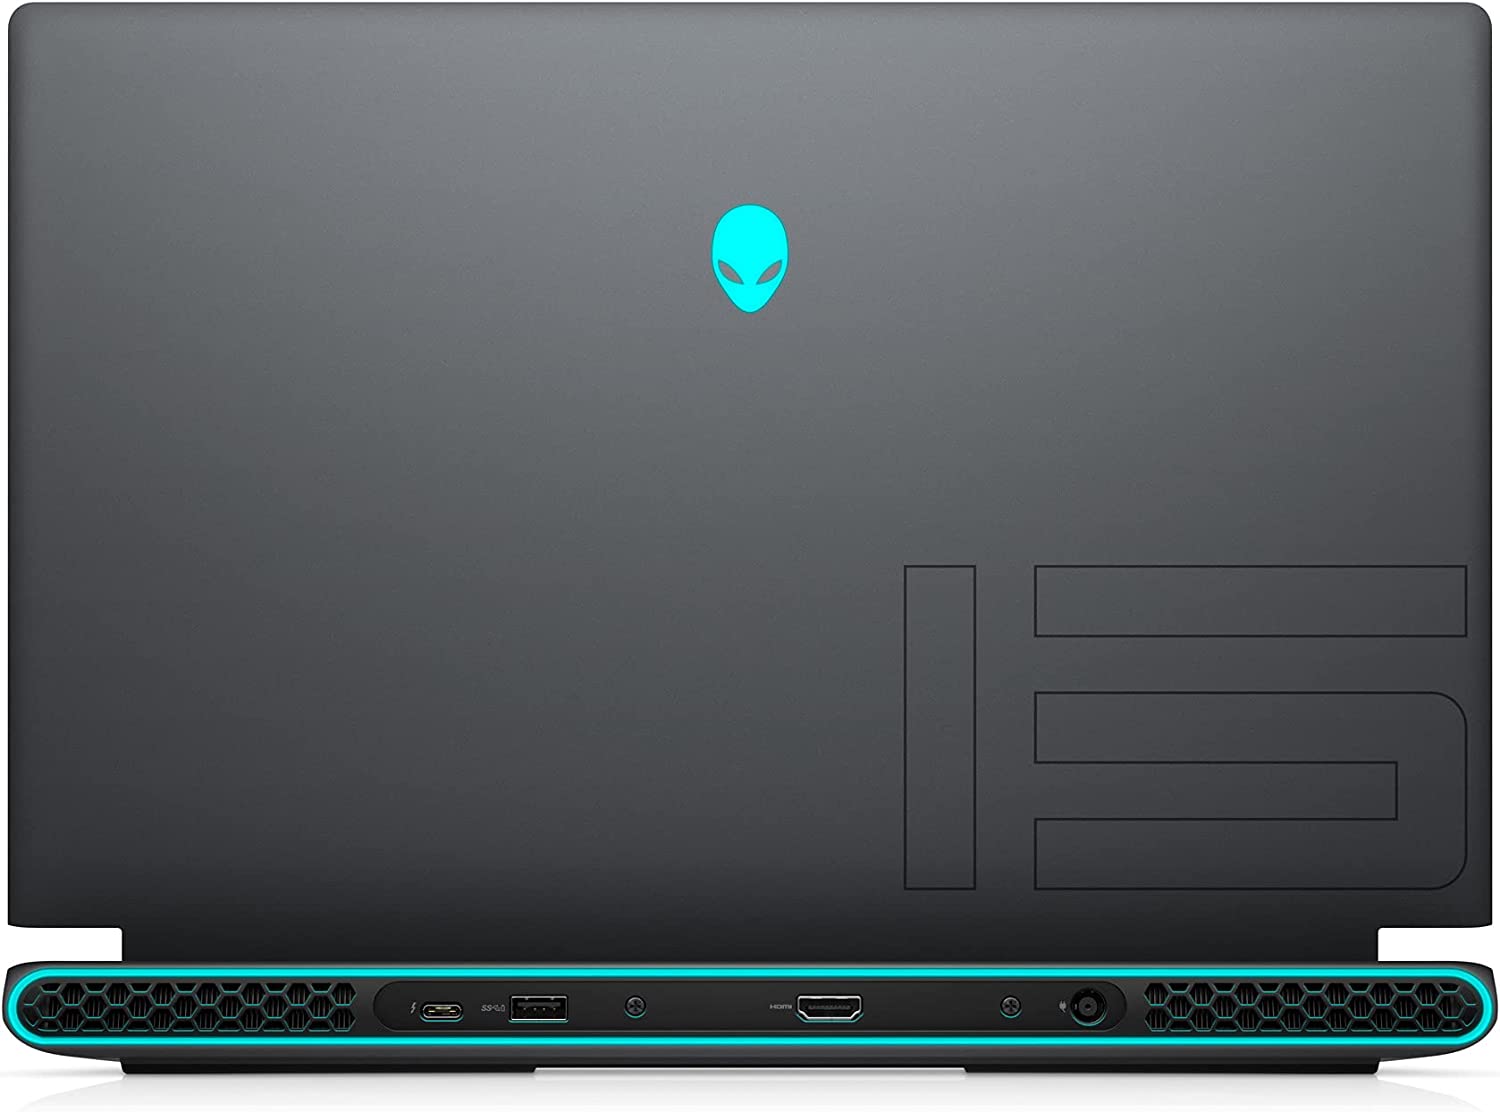 Alienware AWM15R6-7425BLK for rent